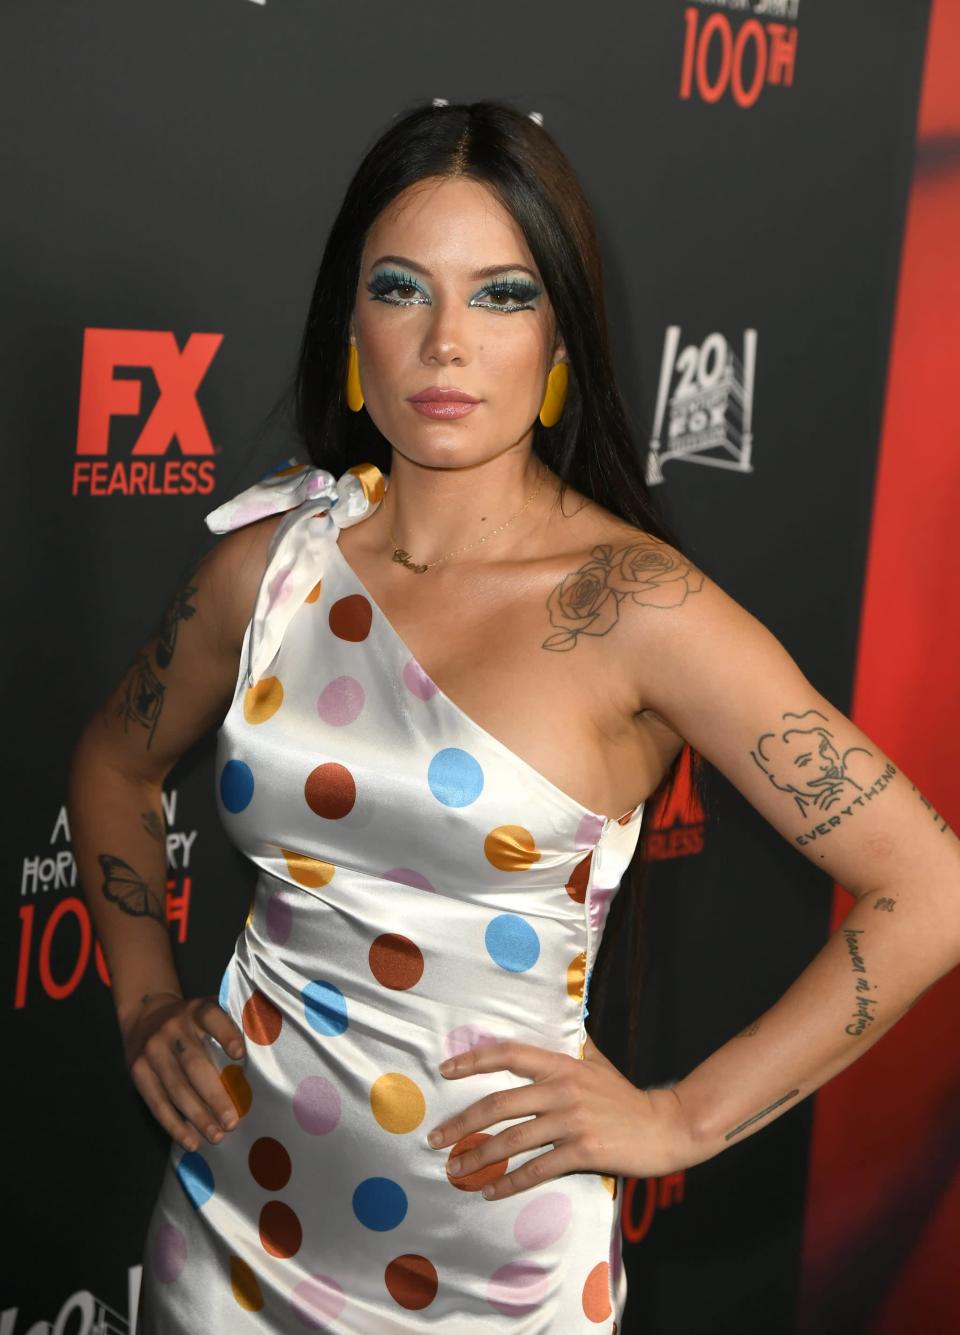 <p>Halsey has a match tattoo on her forearm that she got with three fans in 2015. She explained that she picked people at random on Twitter and <a href="https://www.iheart.com/content/2019-02-22-tattoo-stories-with-halsey-family-ink-matching-fan-tattoos-more/" class="link " rel="nofollow noopener" target="_blank" data-ylk="slk:got &quot;match-ing tattoos&quot; with them">got "match-ing tattoos" with them</a>.</p>